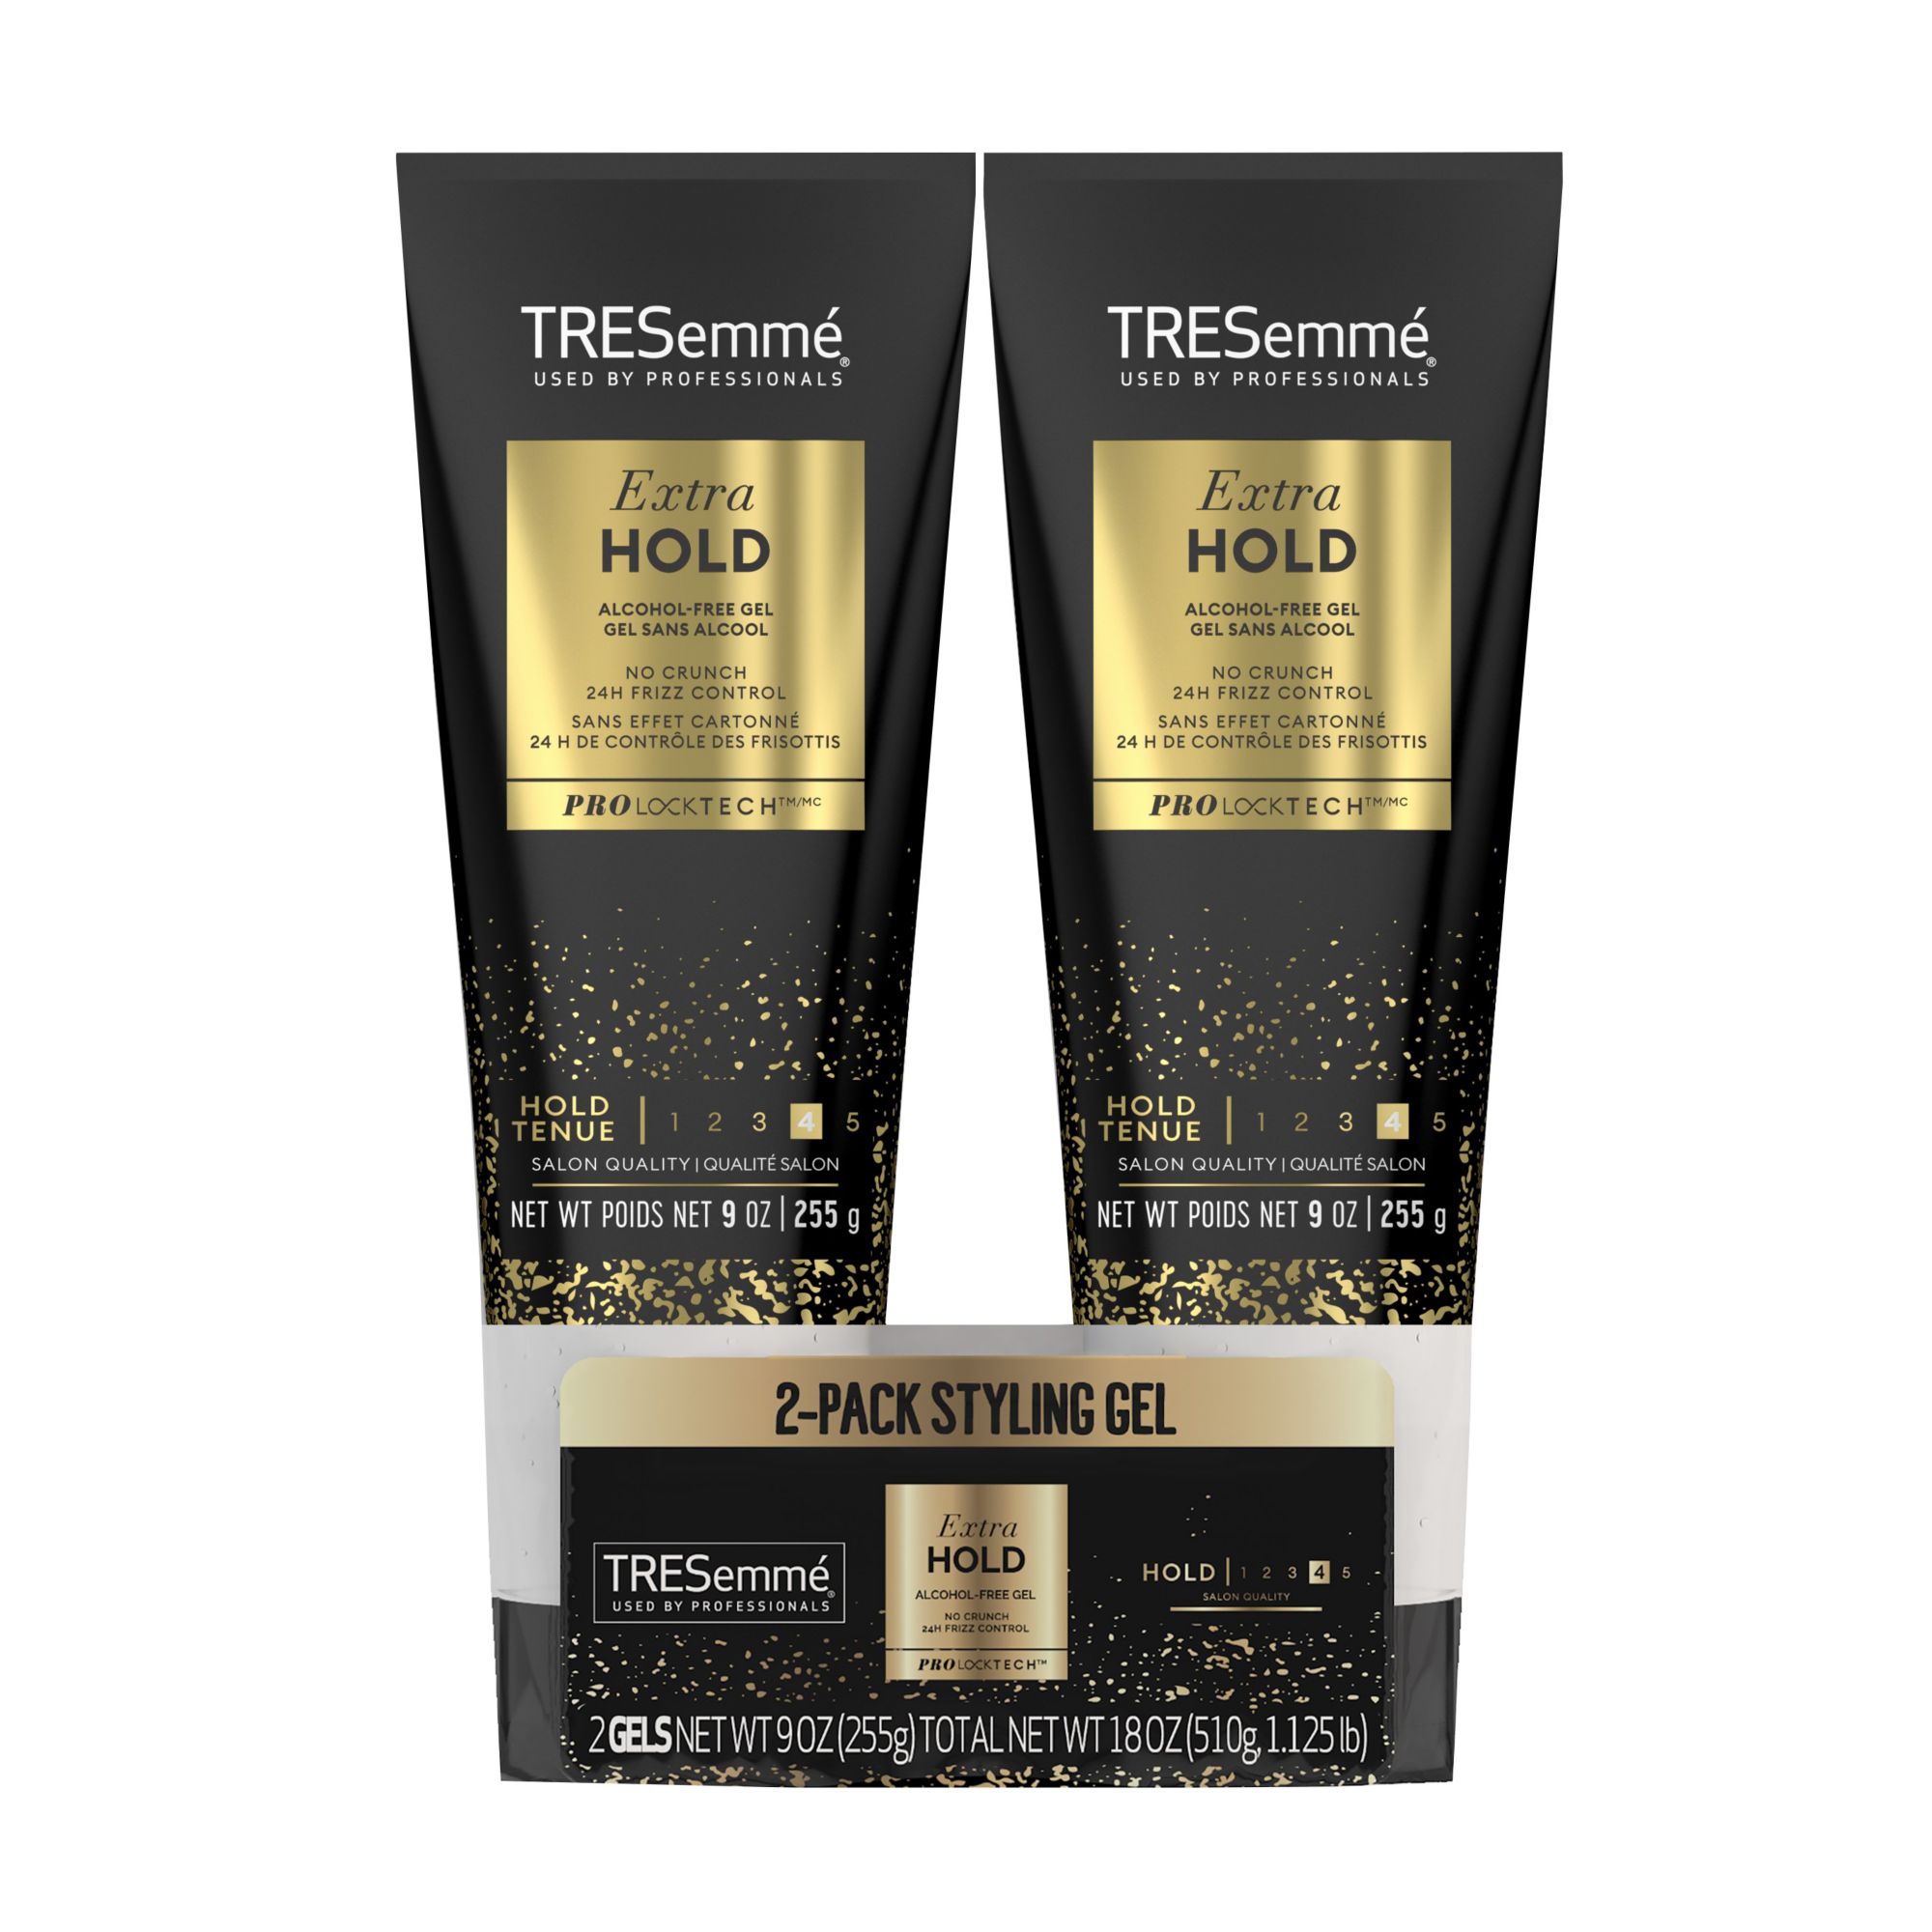 TRESemme Extra Hold Hair Gel Alcohol-Free for 24-Hour Frizz